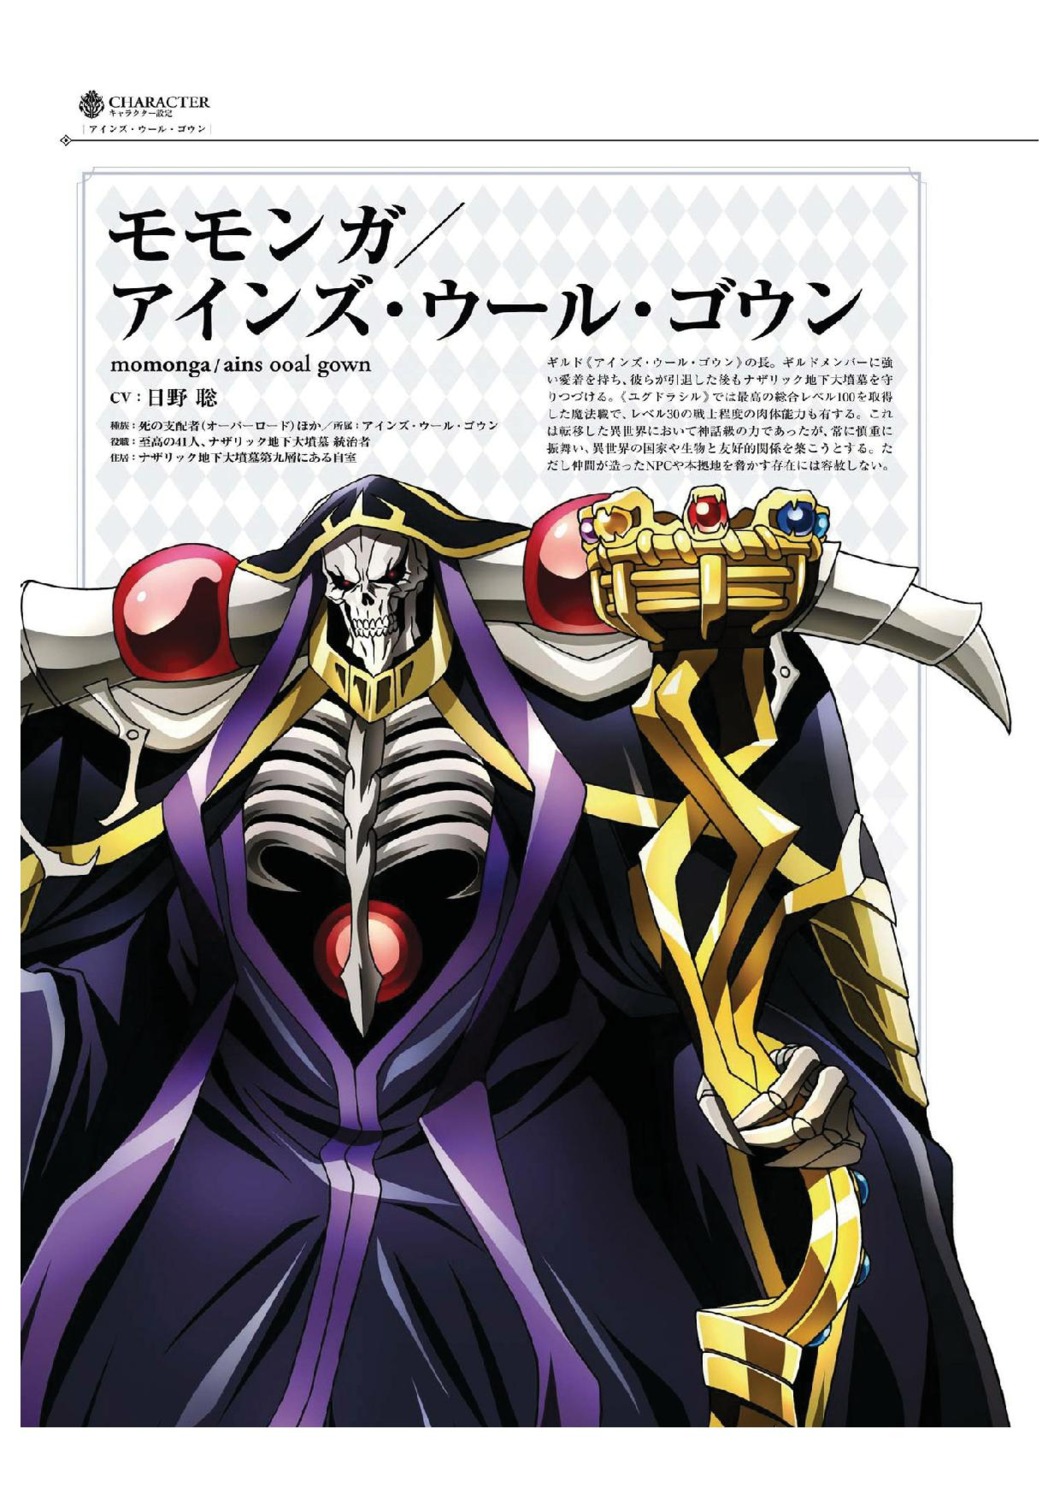 Overlord - Overlord character stat sheets anime version. | Facebook